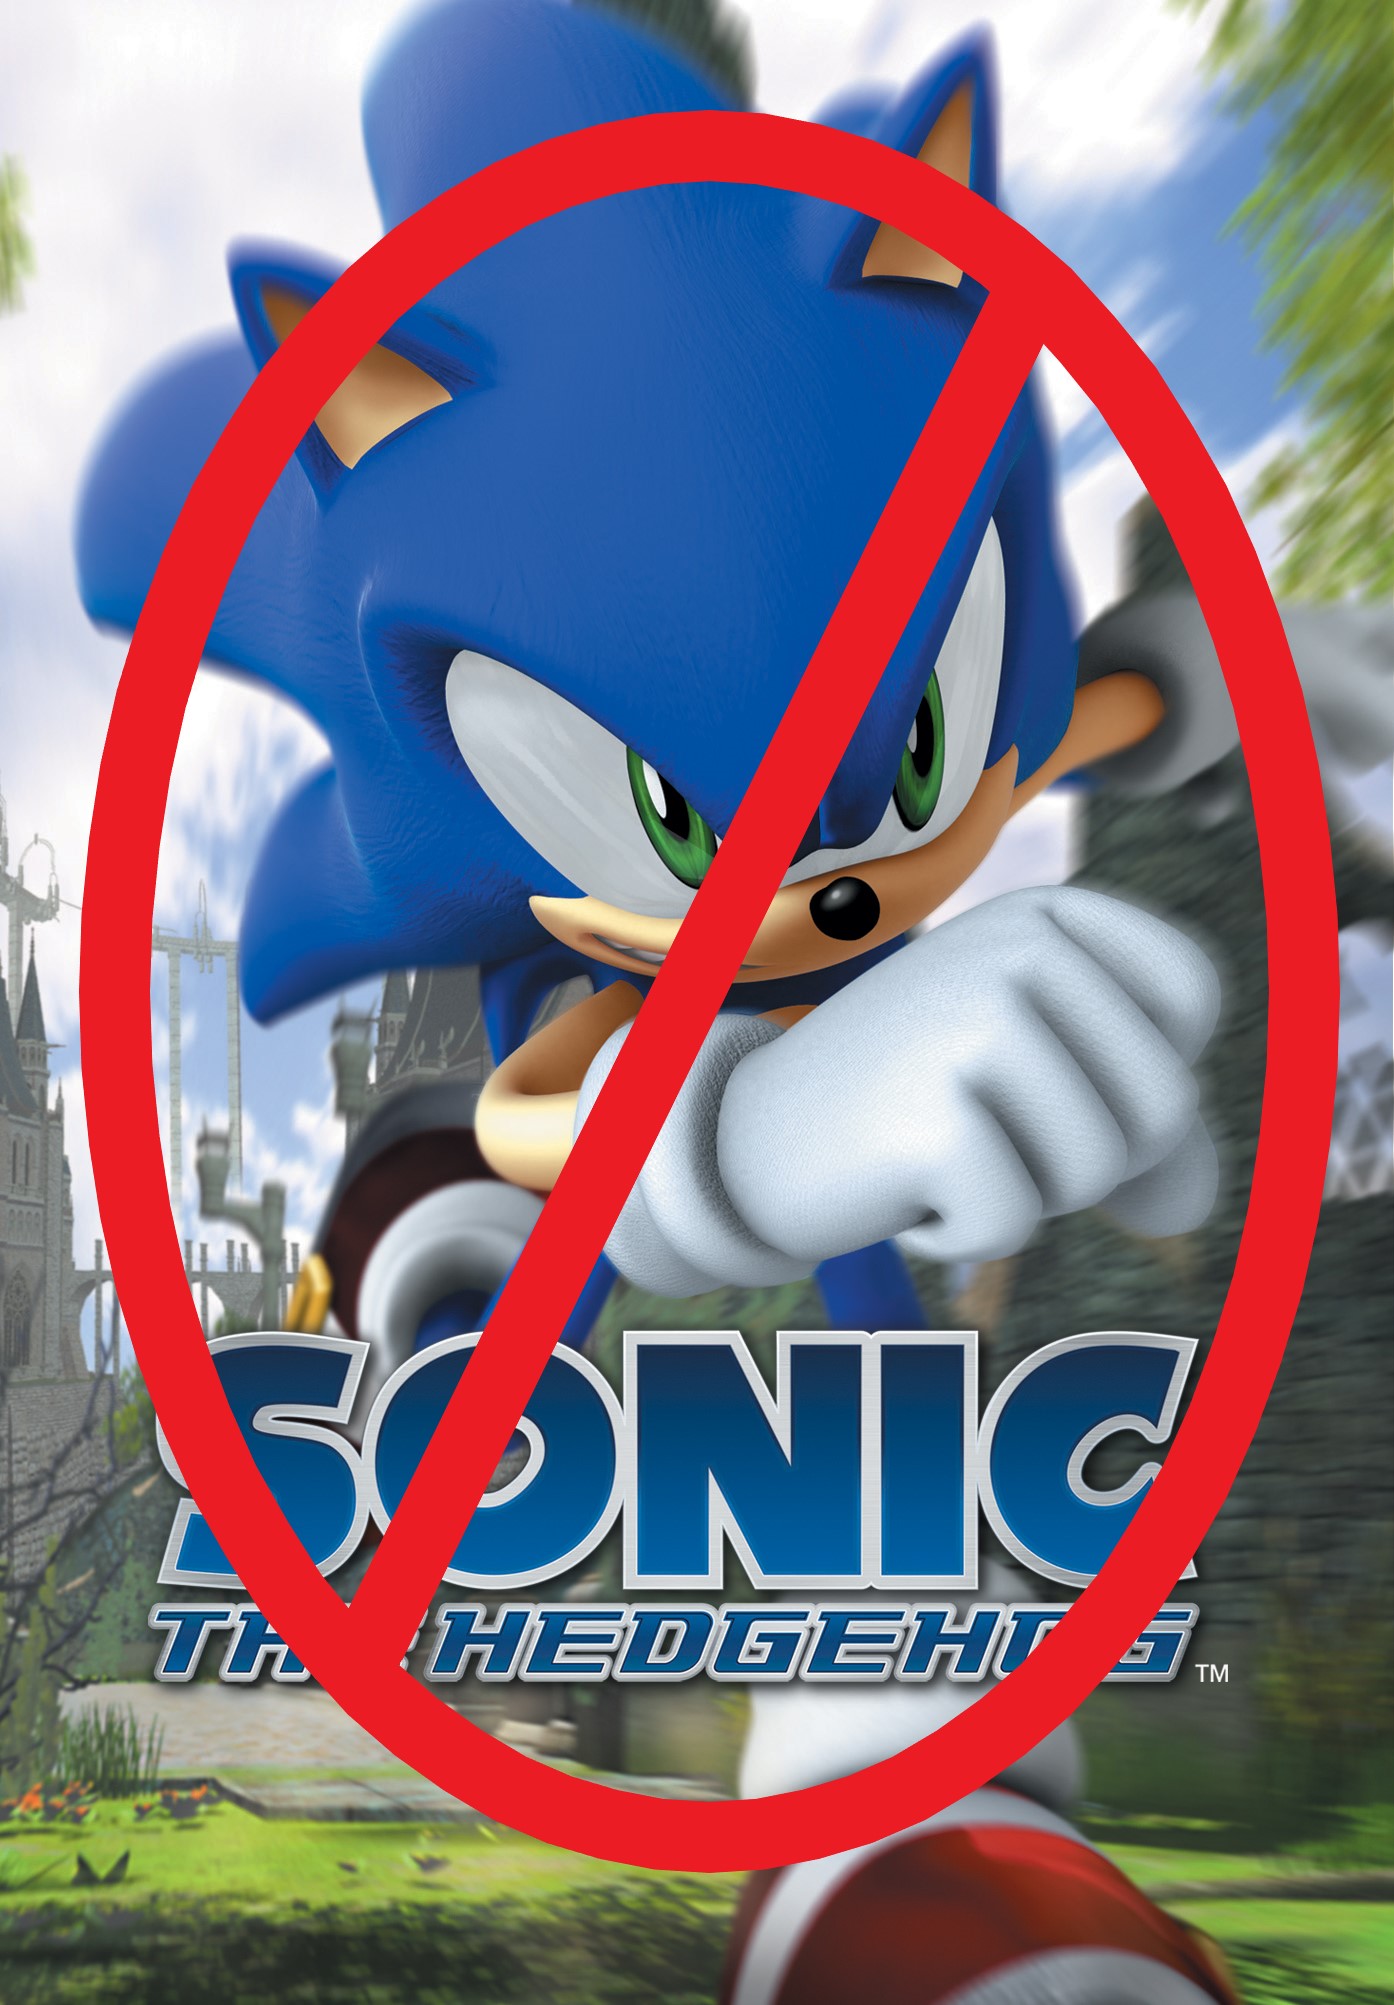 The Truth Behind the Sonic 06 Failure